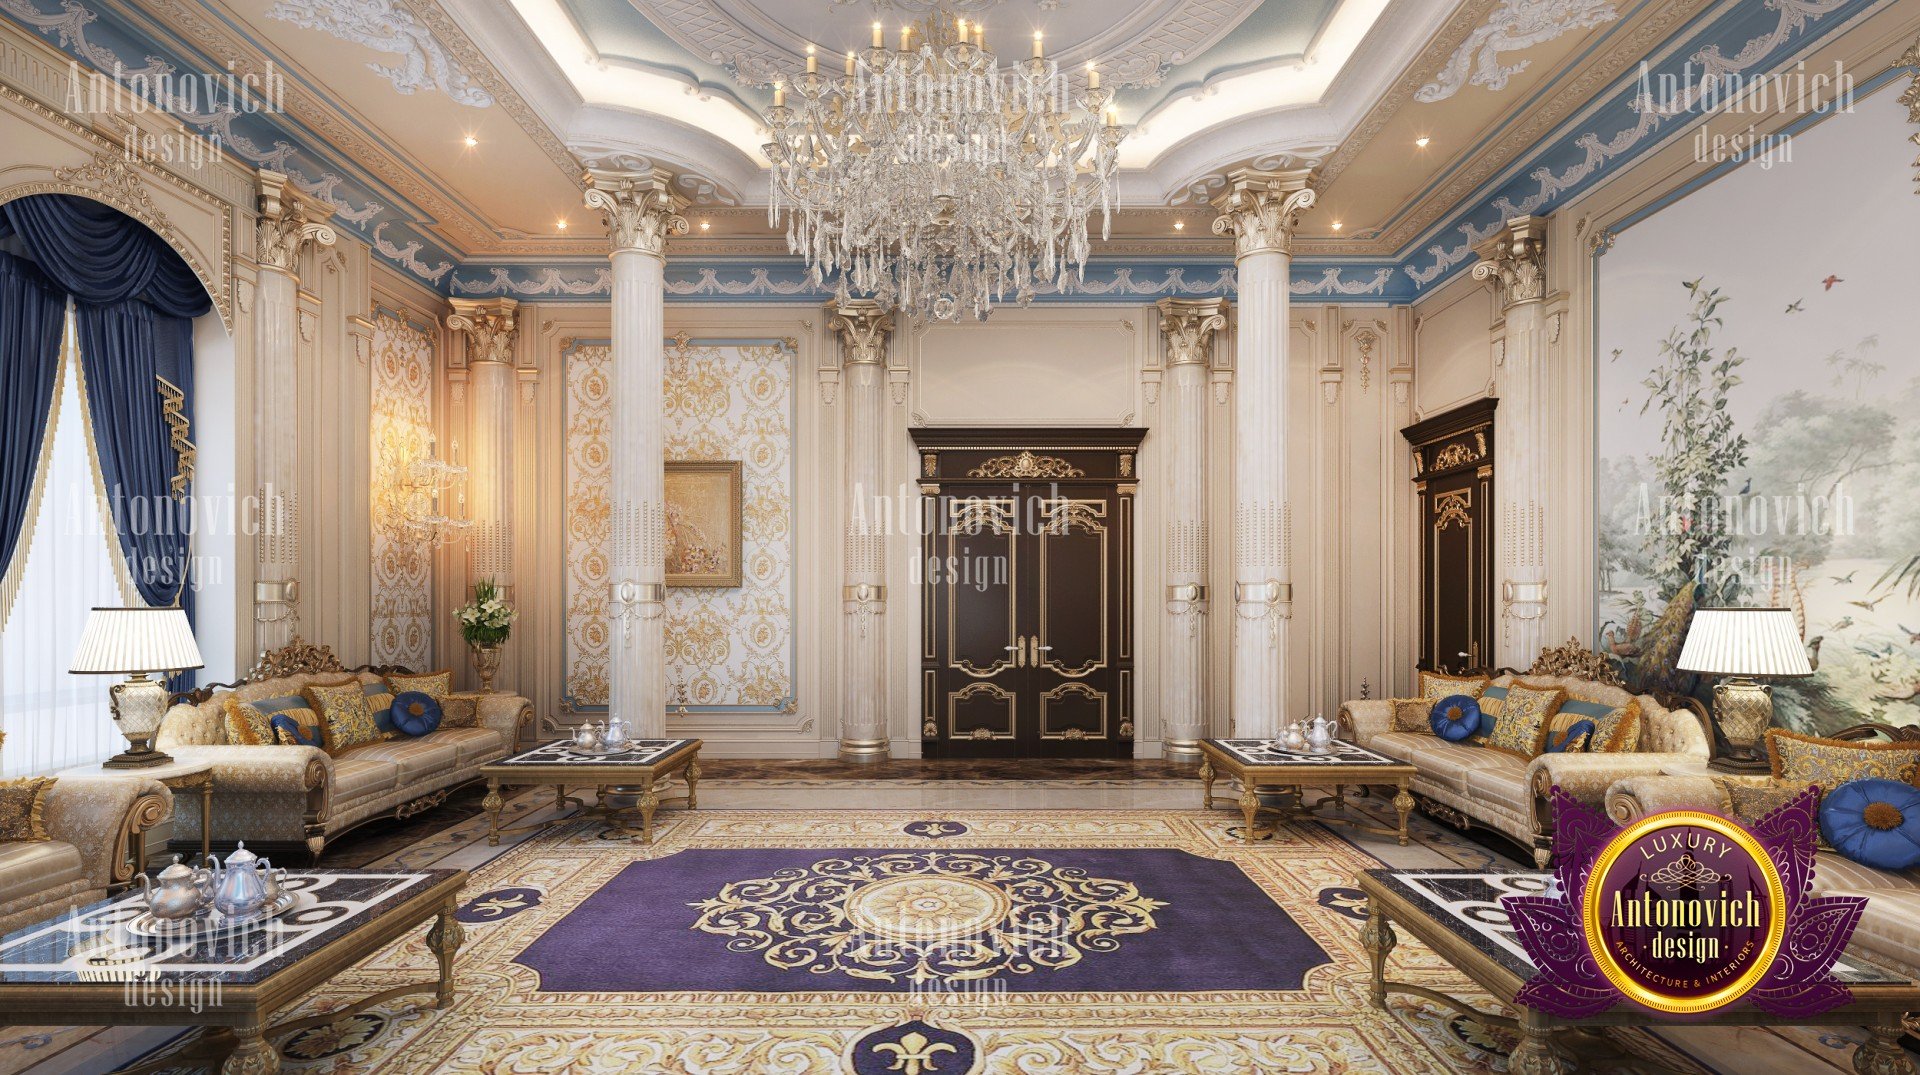 Luxurious Arabic Majlis interior with gold accents and lavish furnishings